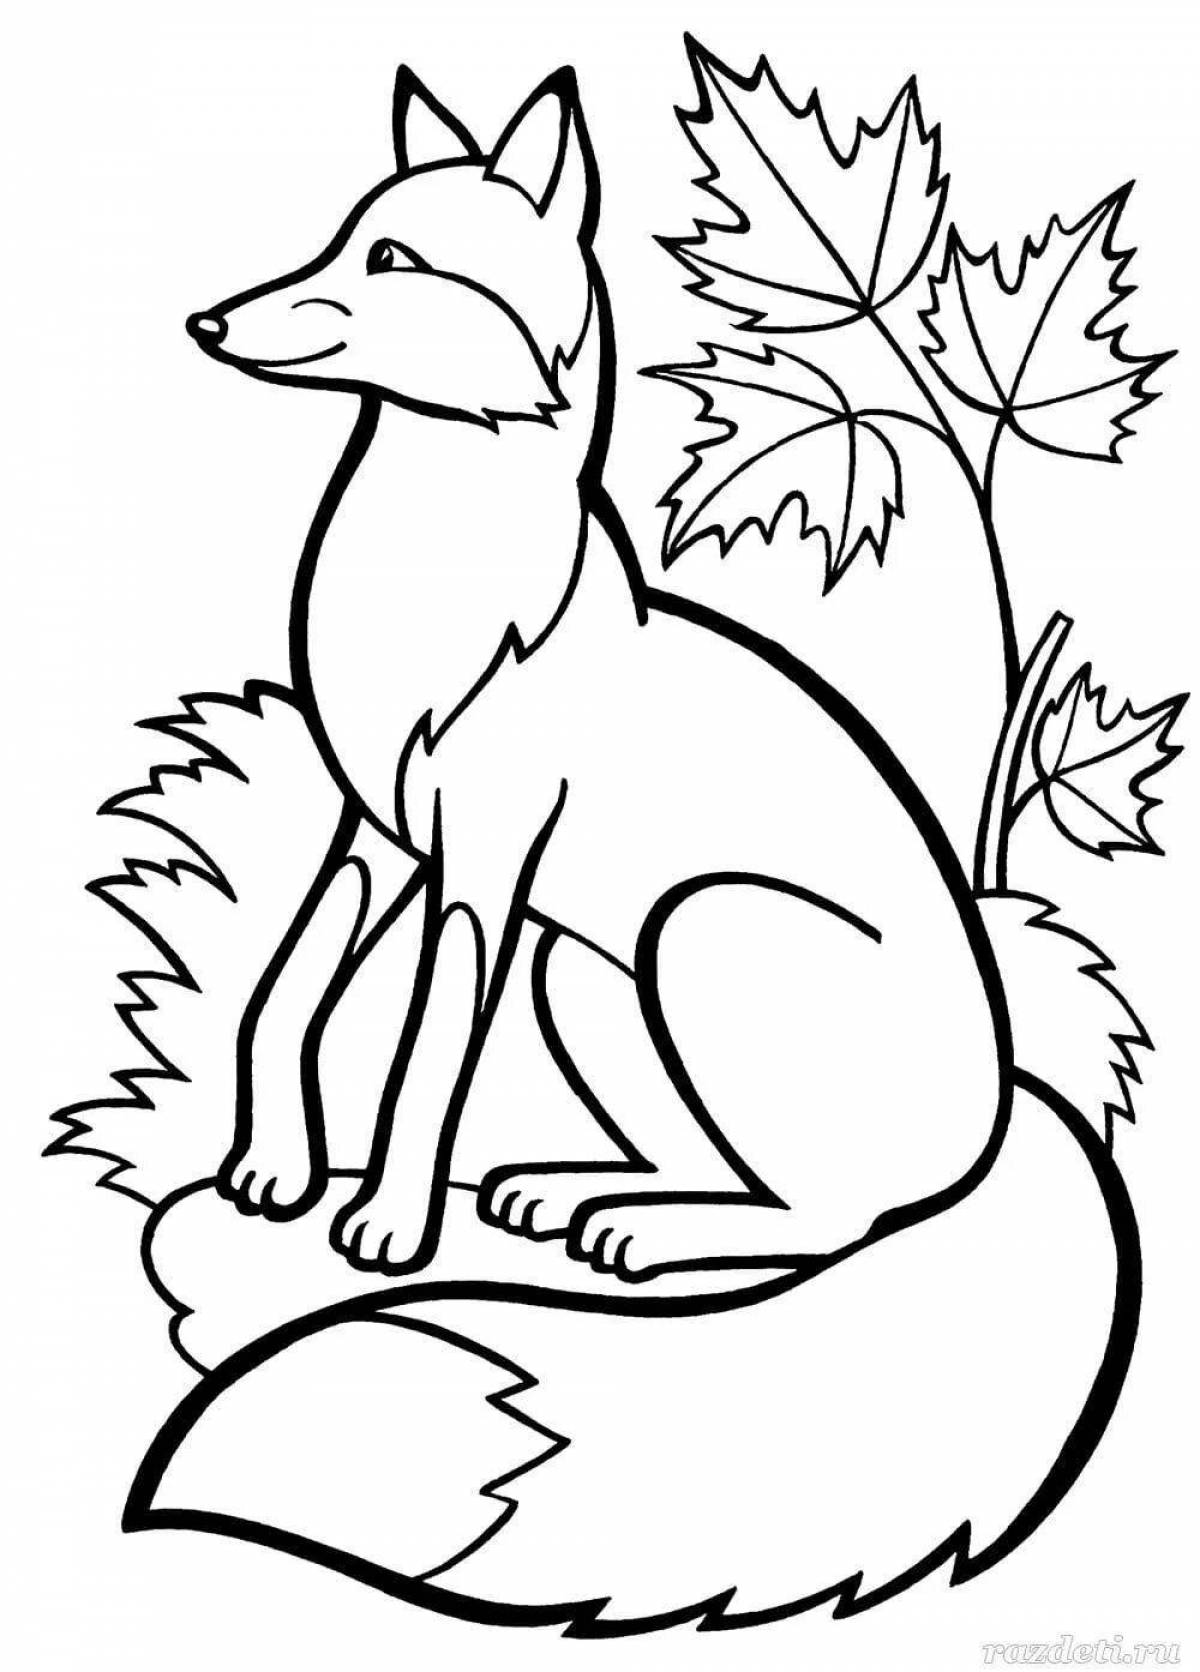 Witty fox coloring book for kids